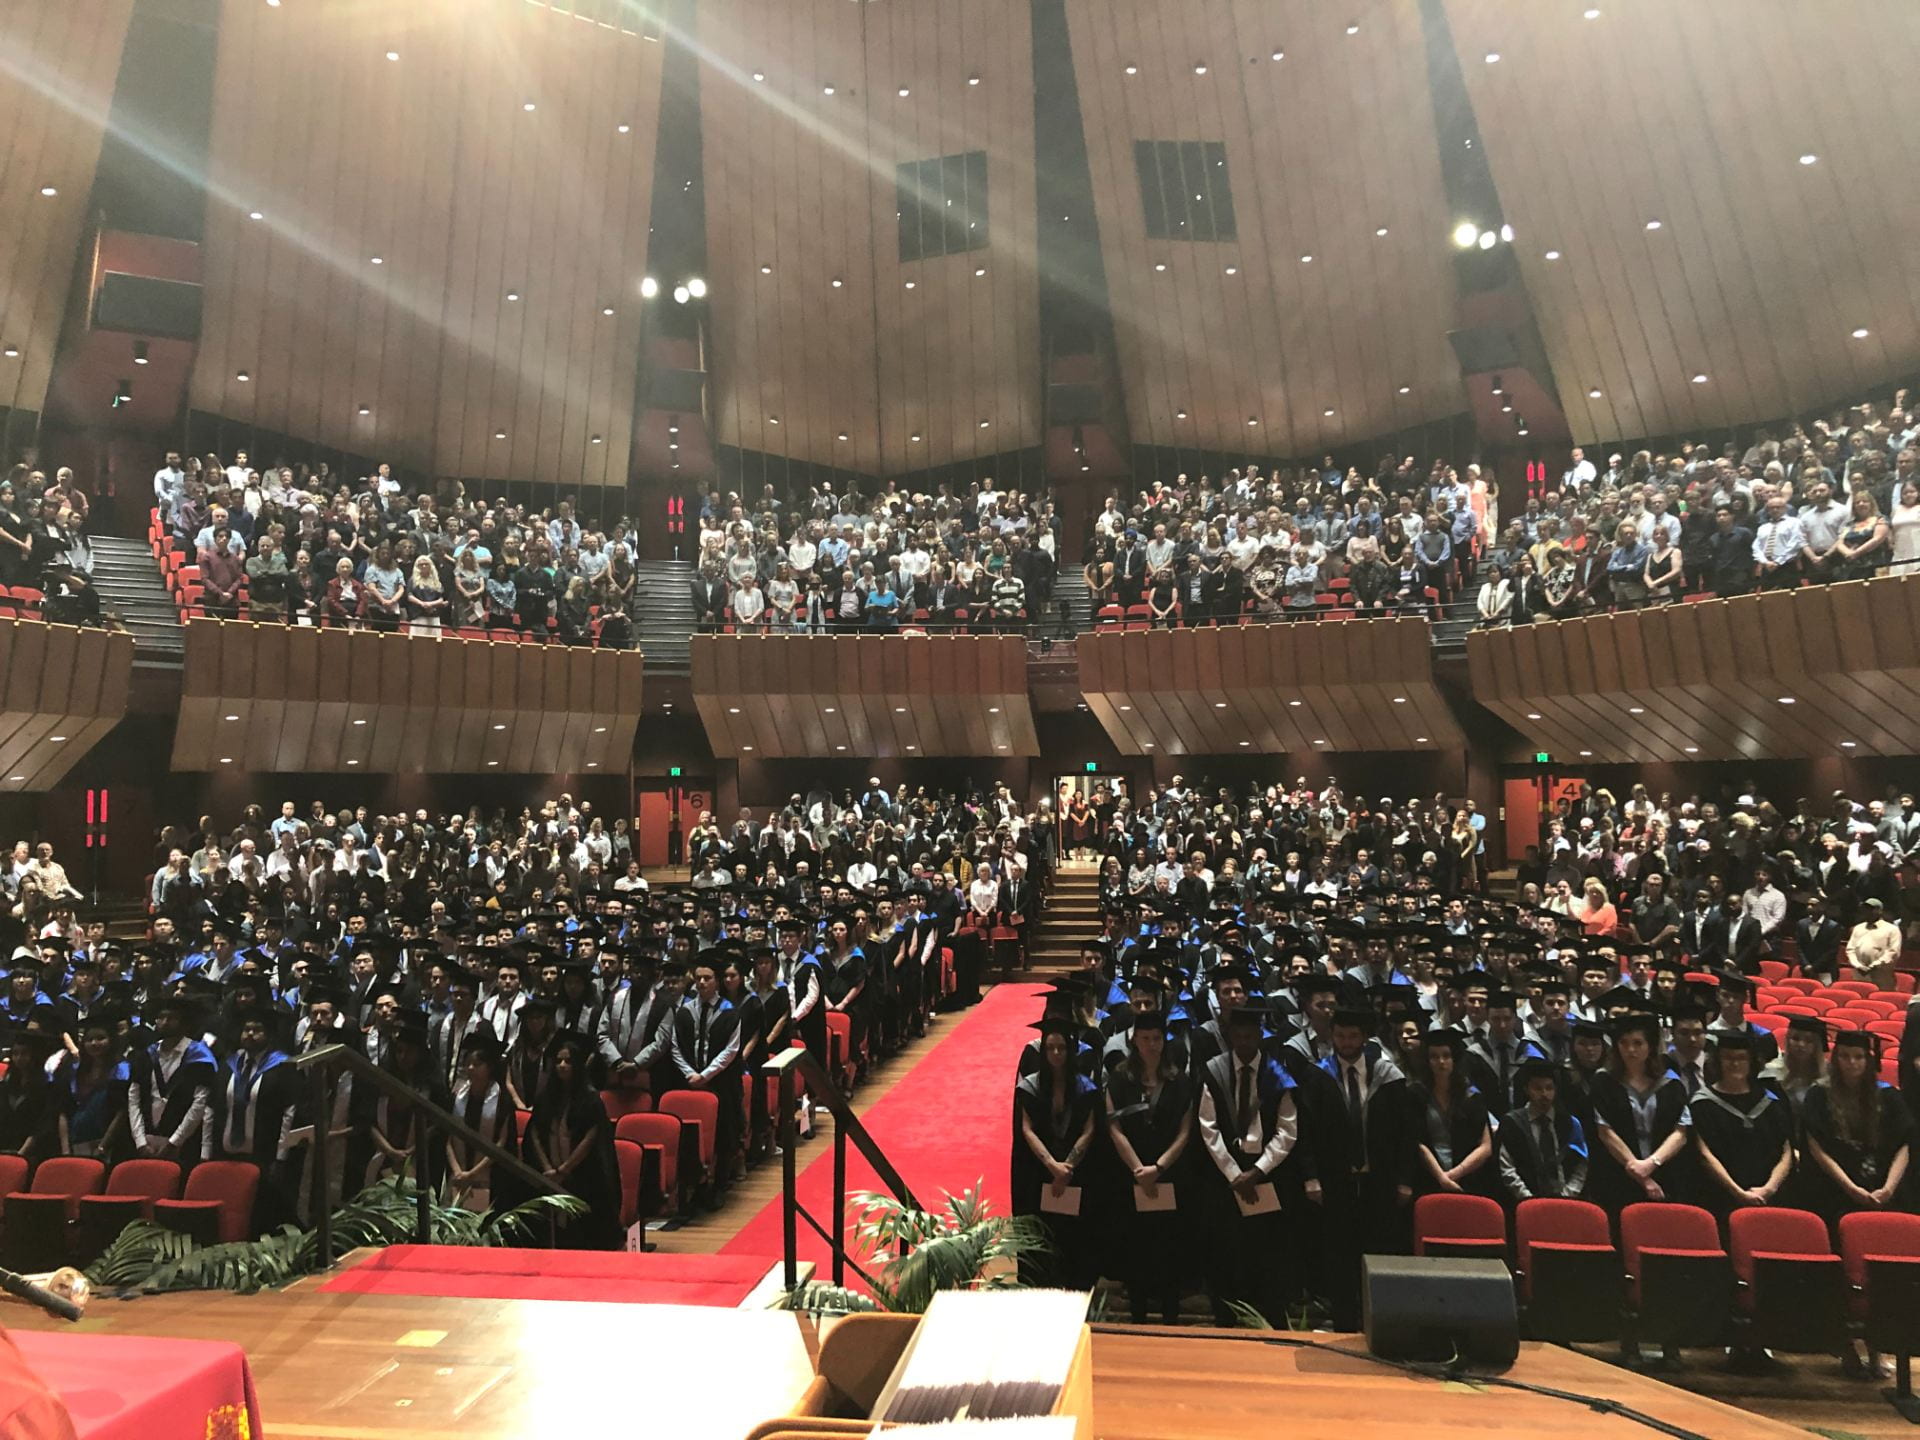 View from the stage of a crowded town hall filled with graduands and spectators